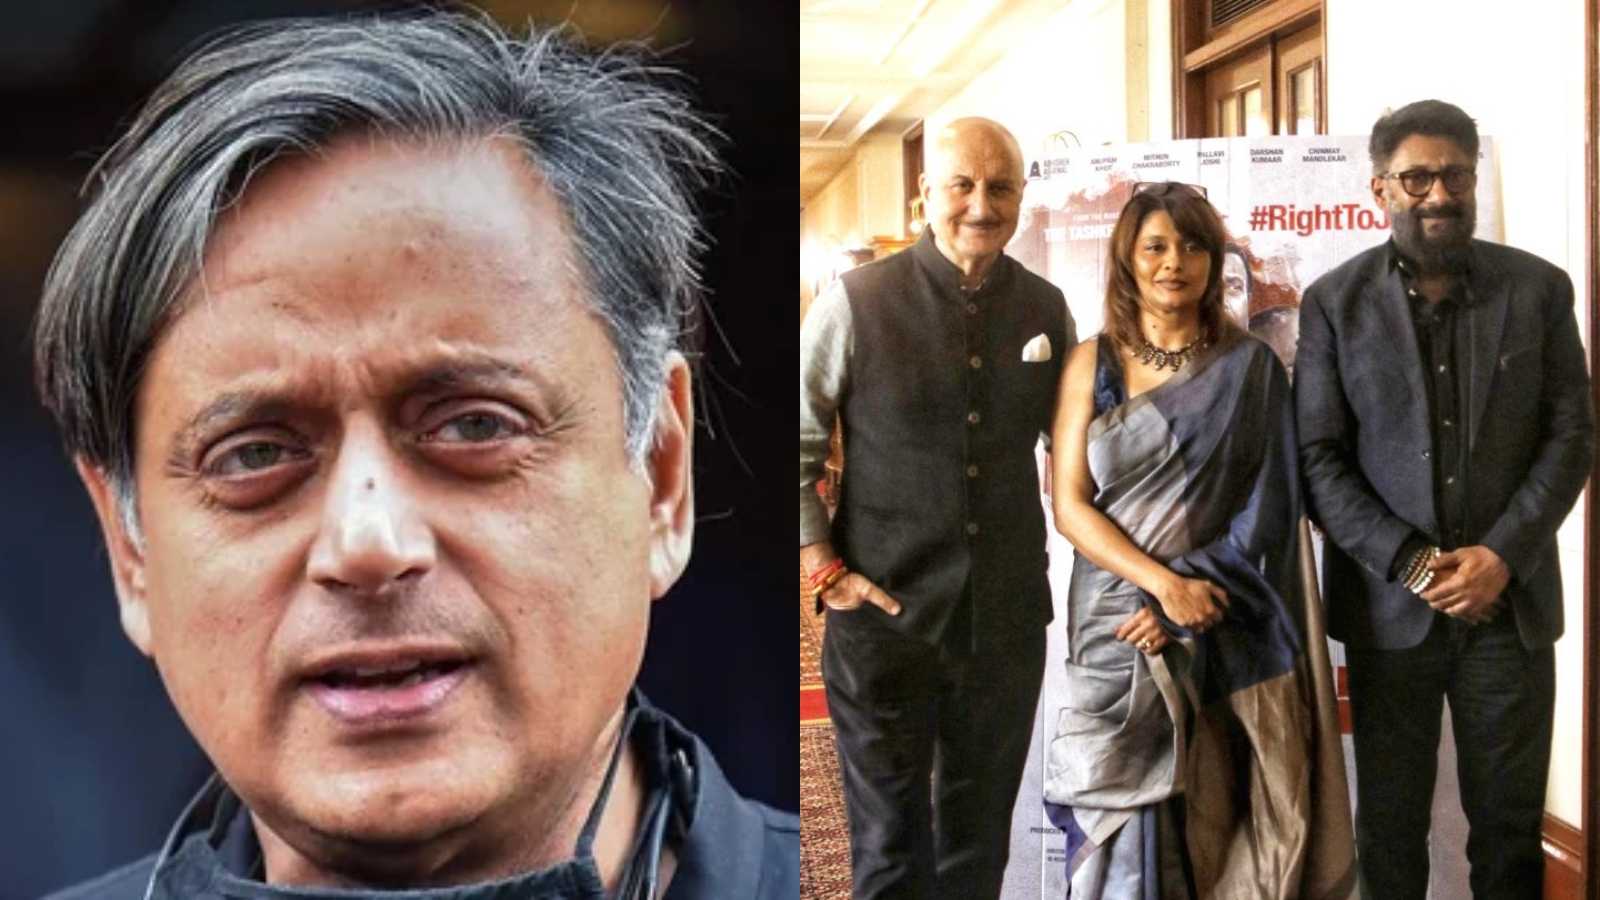 The Kashmir Files: Vivek Agnihotri, Anupam Kher clash with Shashi Tharoor; MP reacts as the filmmaker, actor bring up his late wife